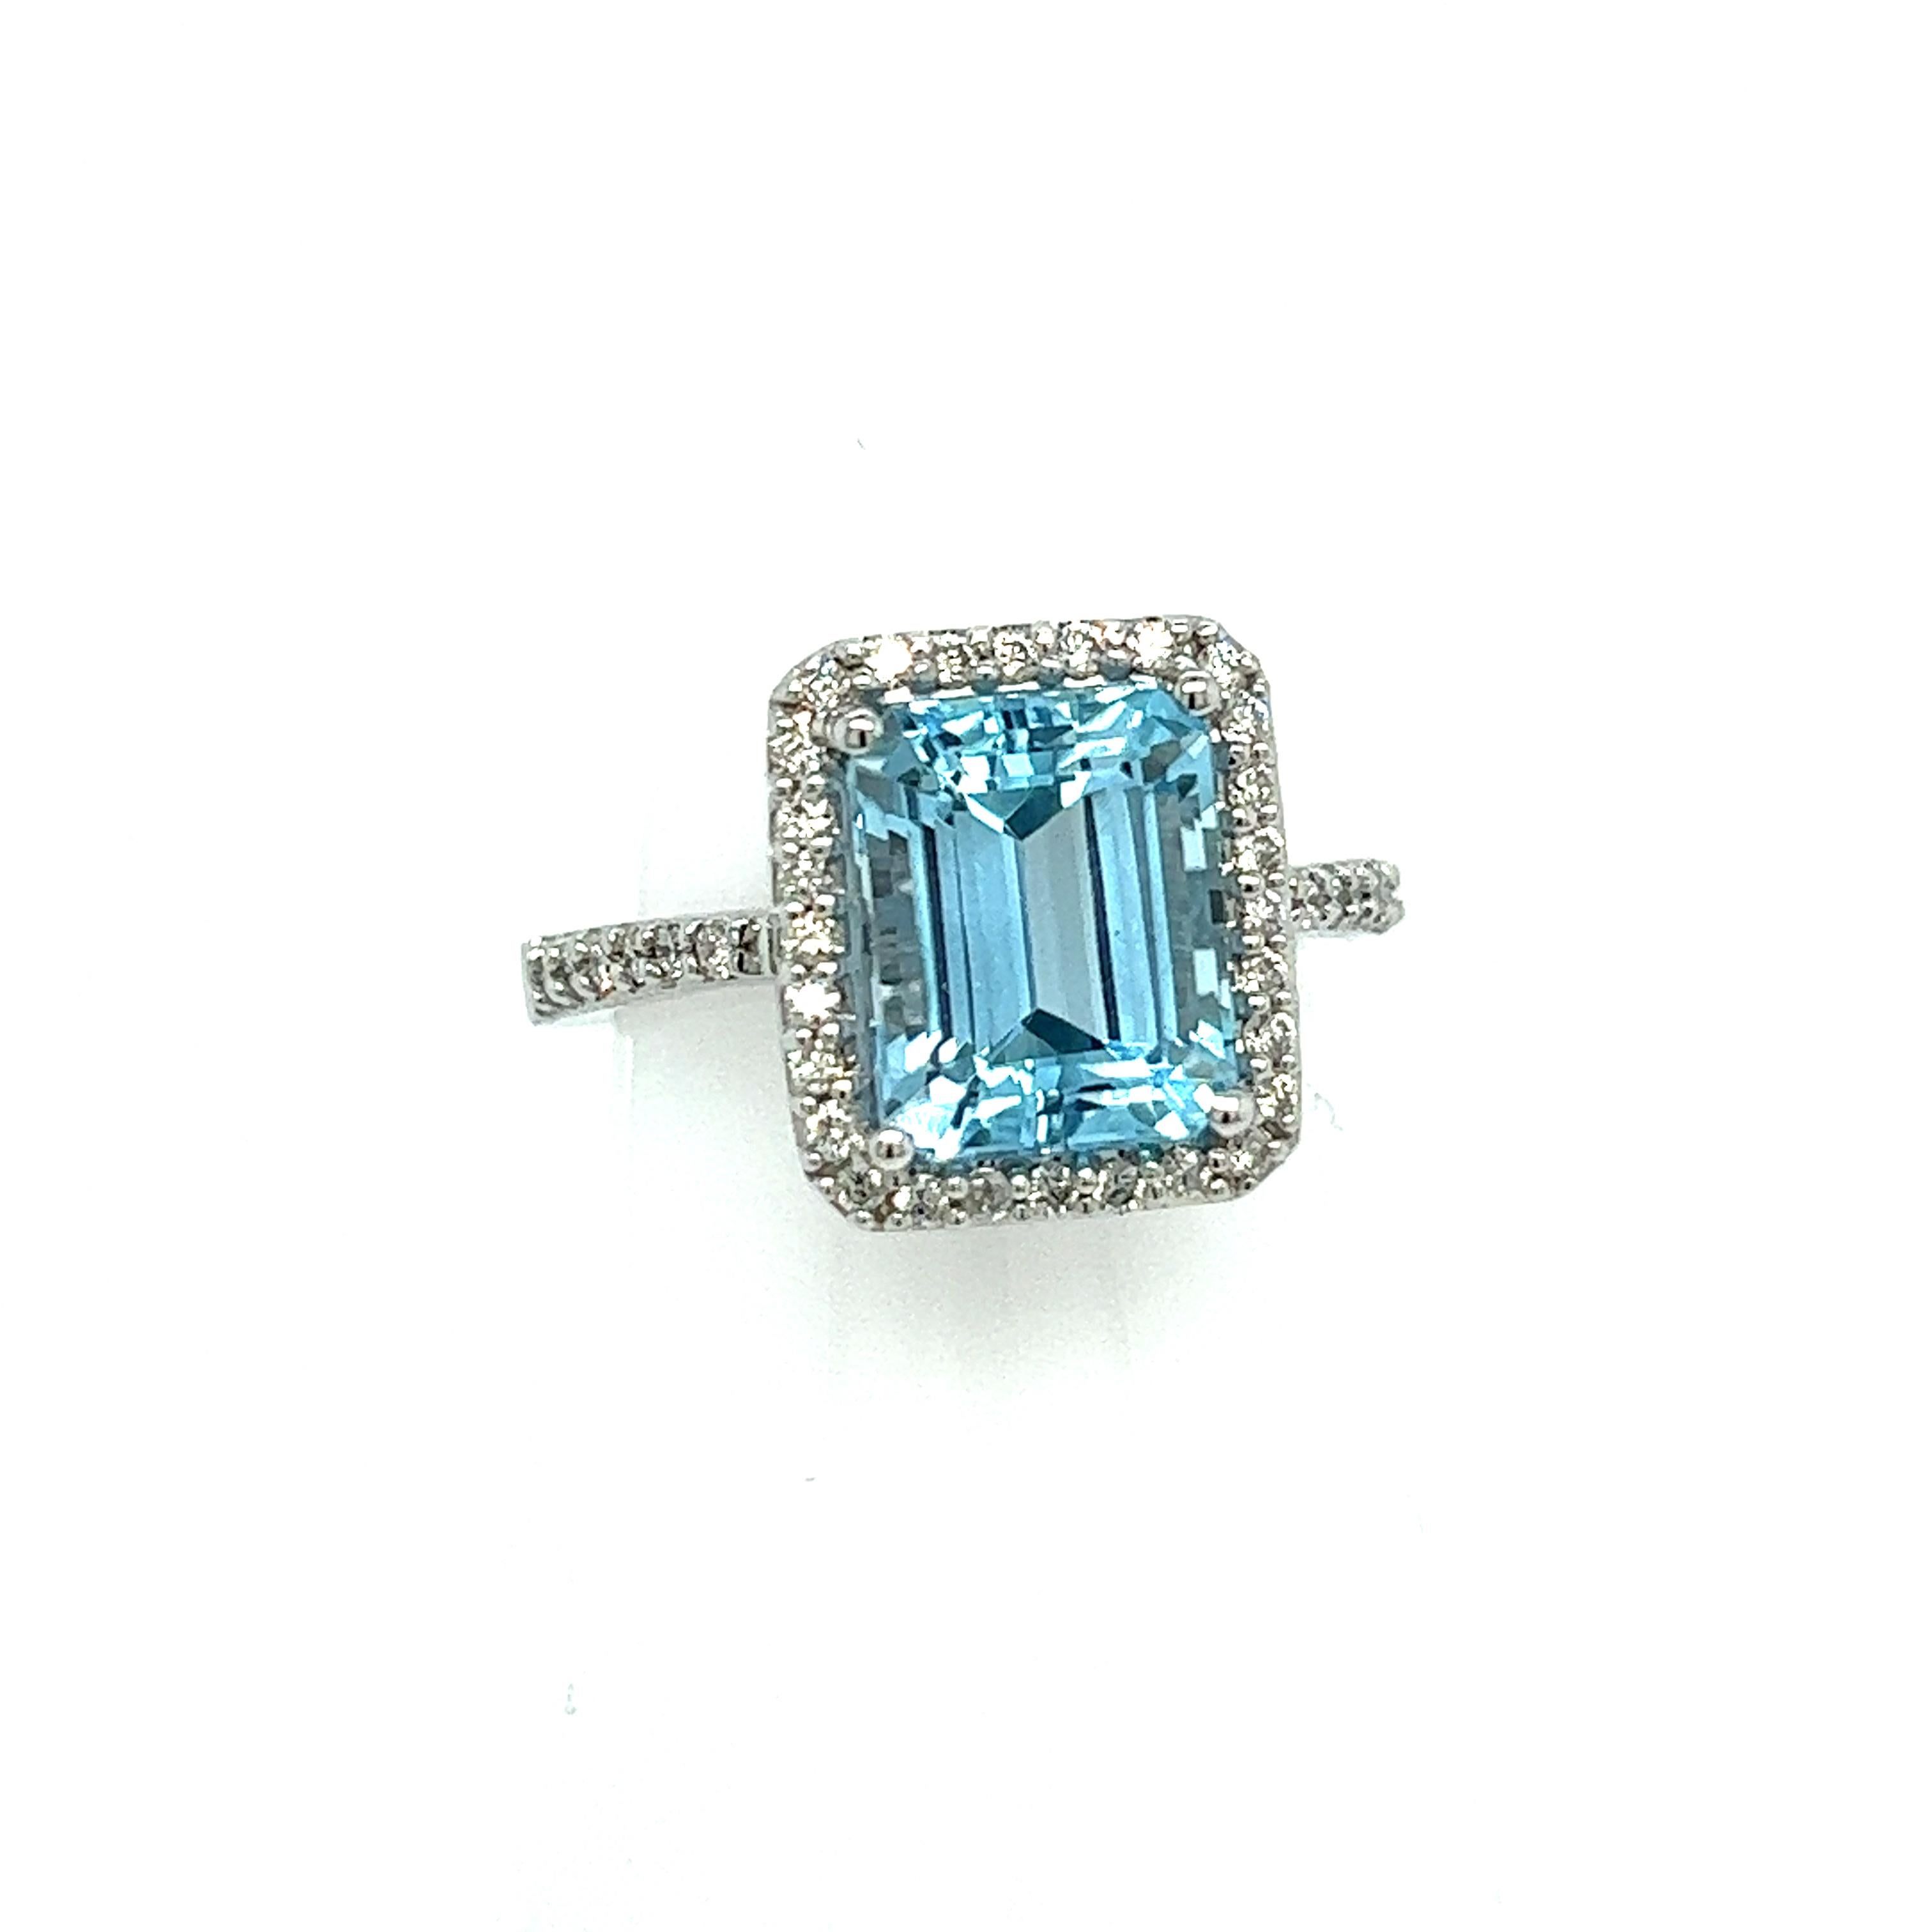 Natural Topaz Diamond Ring 6.5 14k W Gold 5.1 TCW Certified In New Condition For Sale In Brooklyn, NY